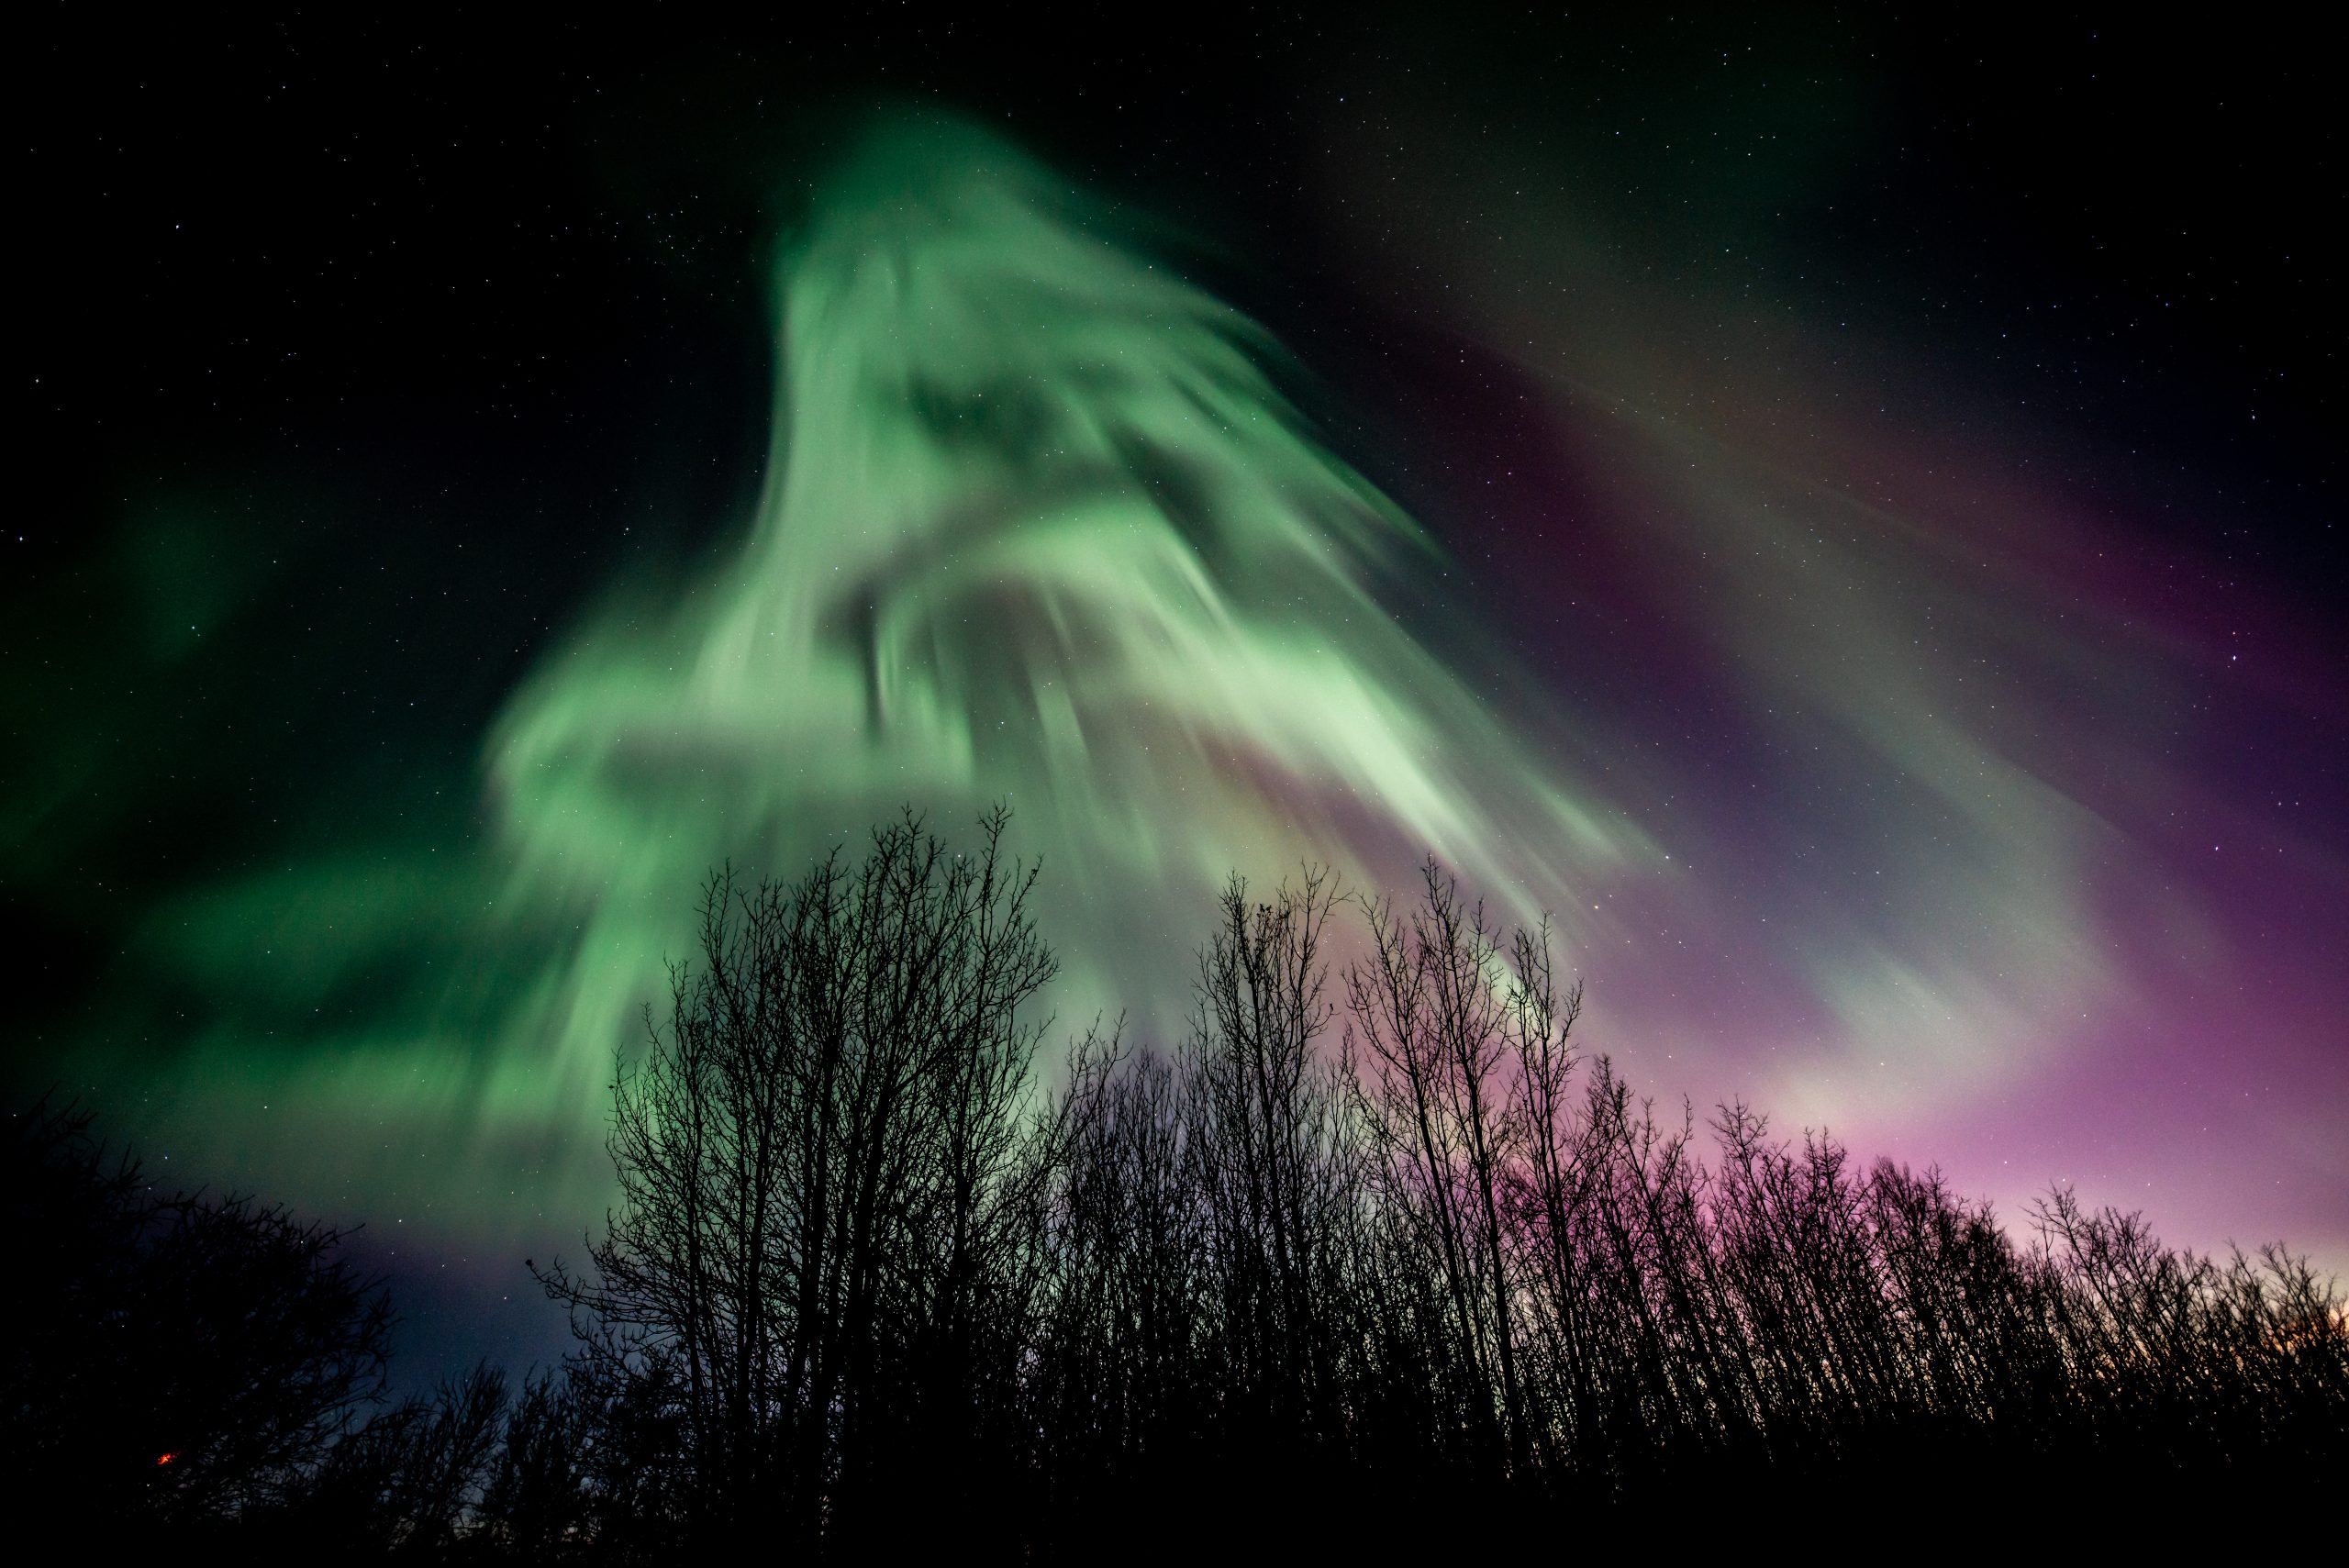 More chances to see northern lights in Alberta on the way